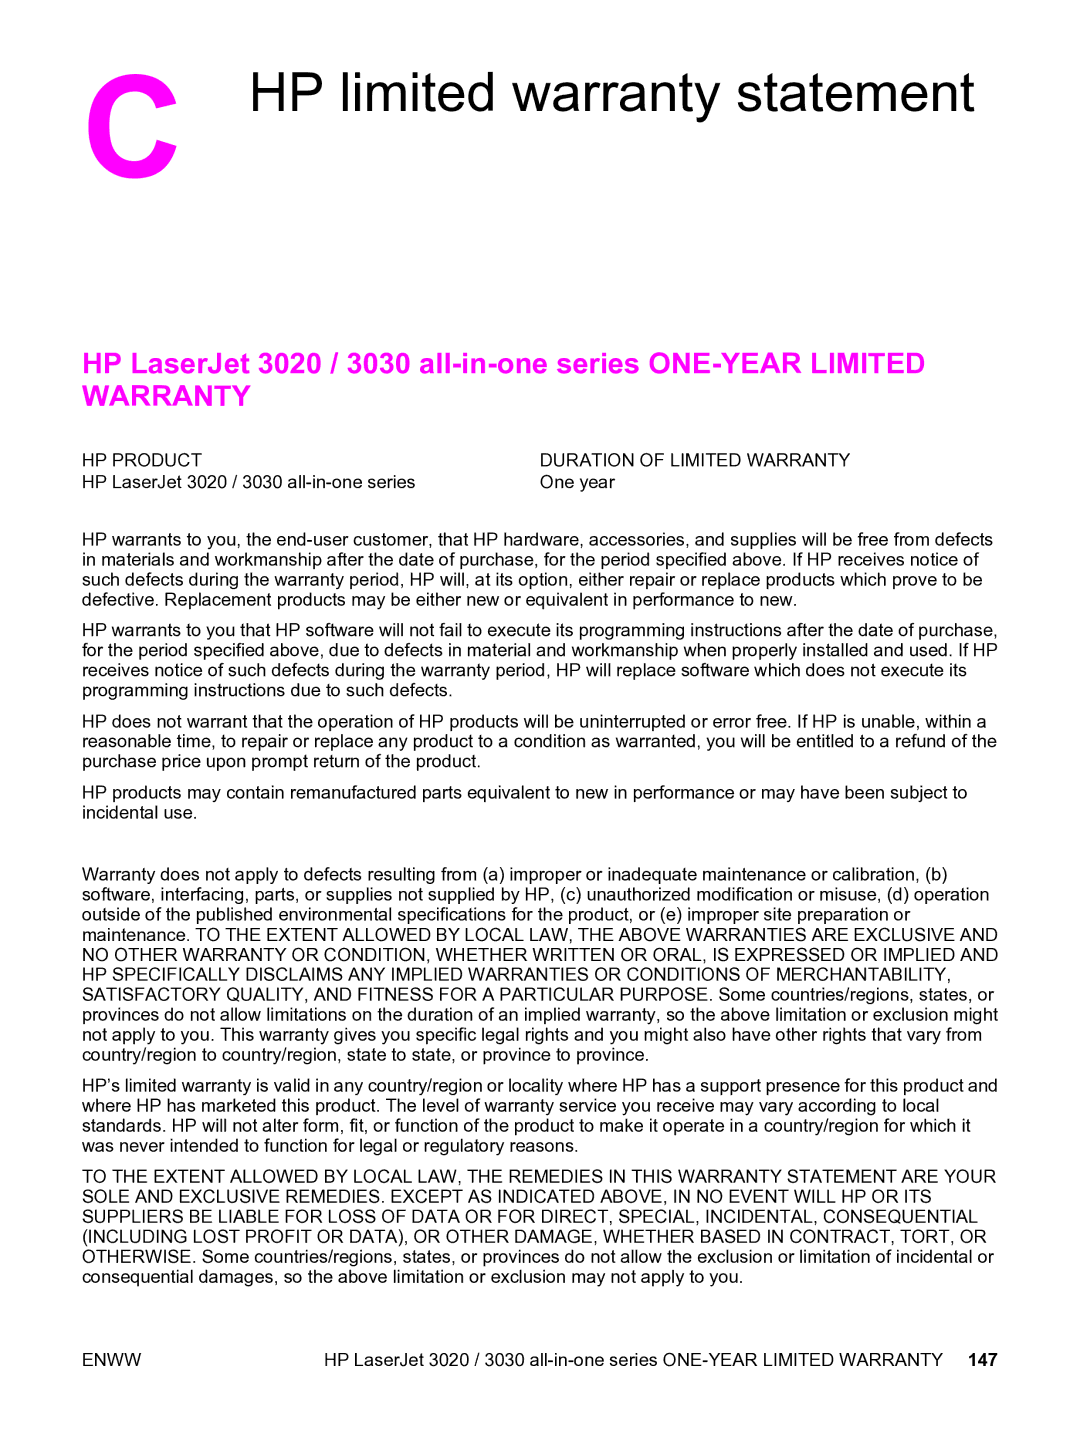 HP 3020 manual HP limited warranty statement, HP Product Duration of Limited Warranty 